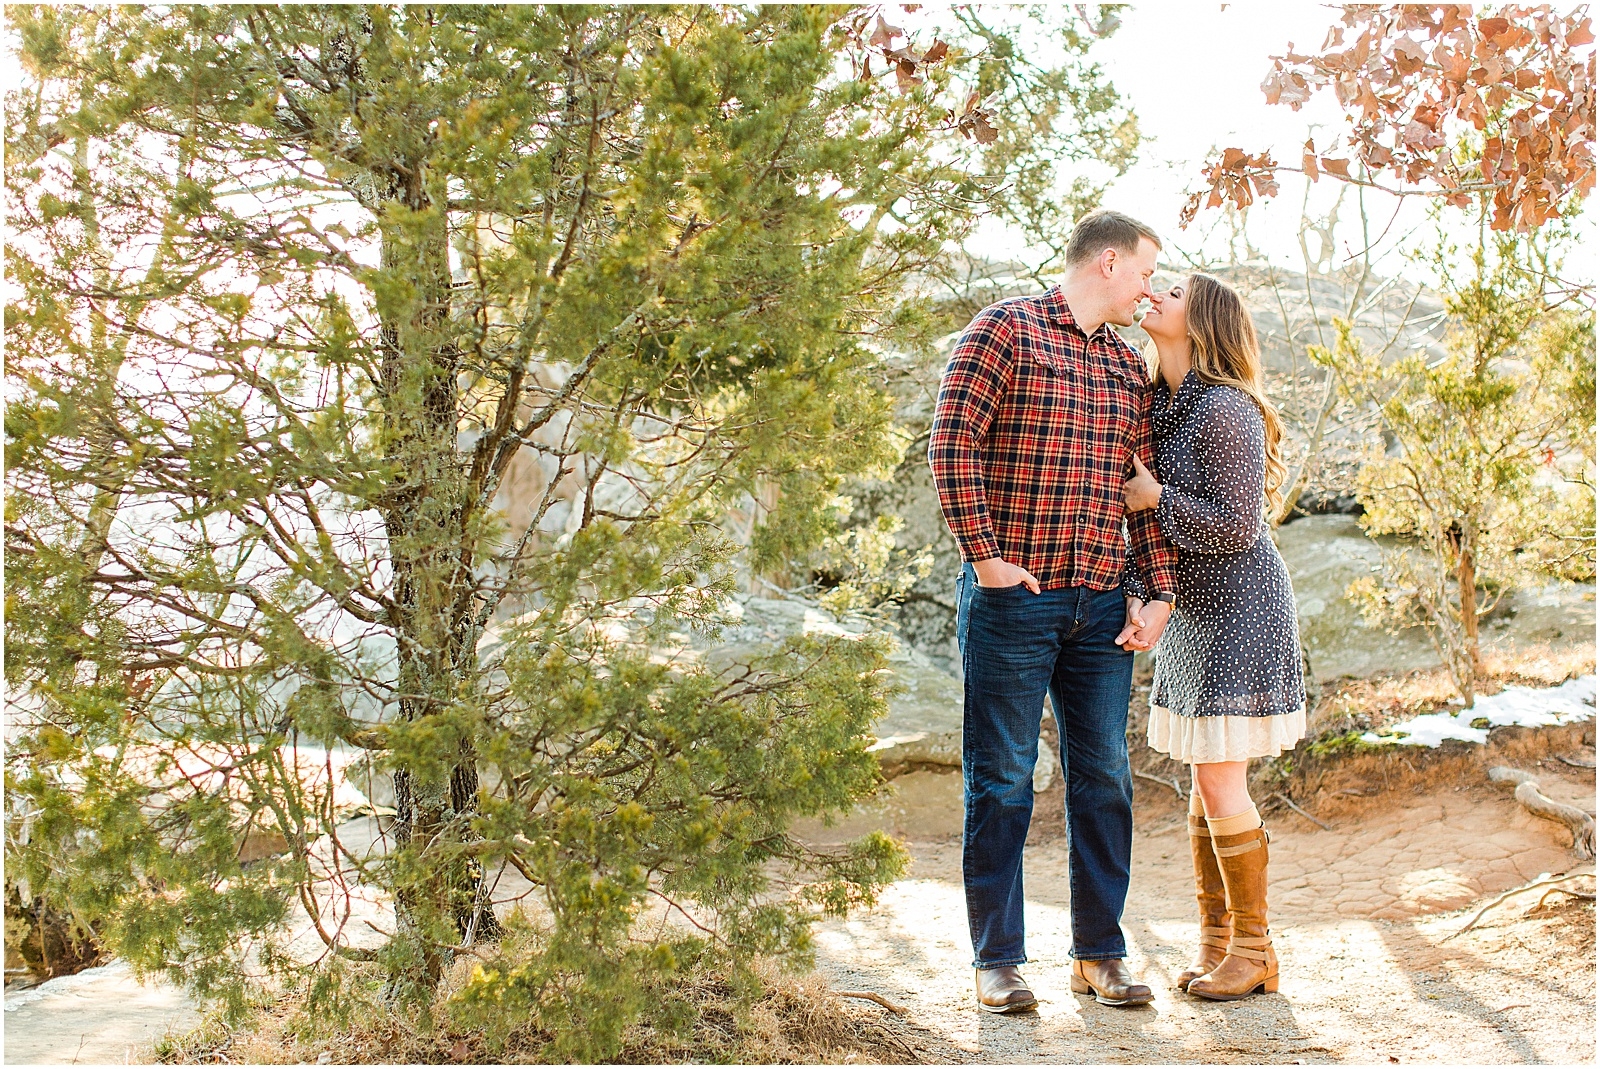 A Sunny Garden of the Gods Engagement Session | Shiloh and Lee | Bret and Brandie Photography004.jpg